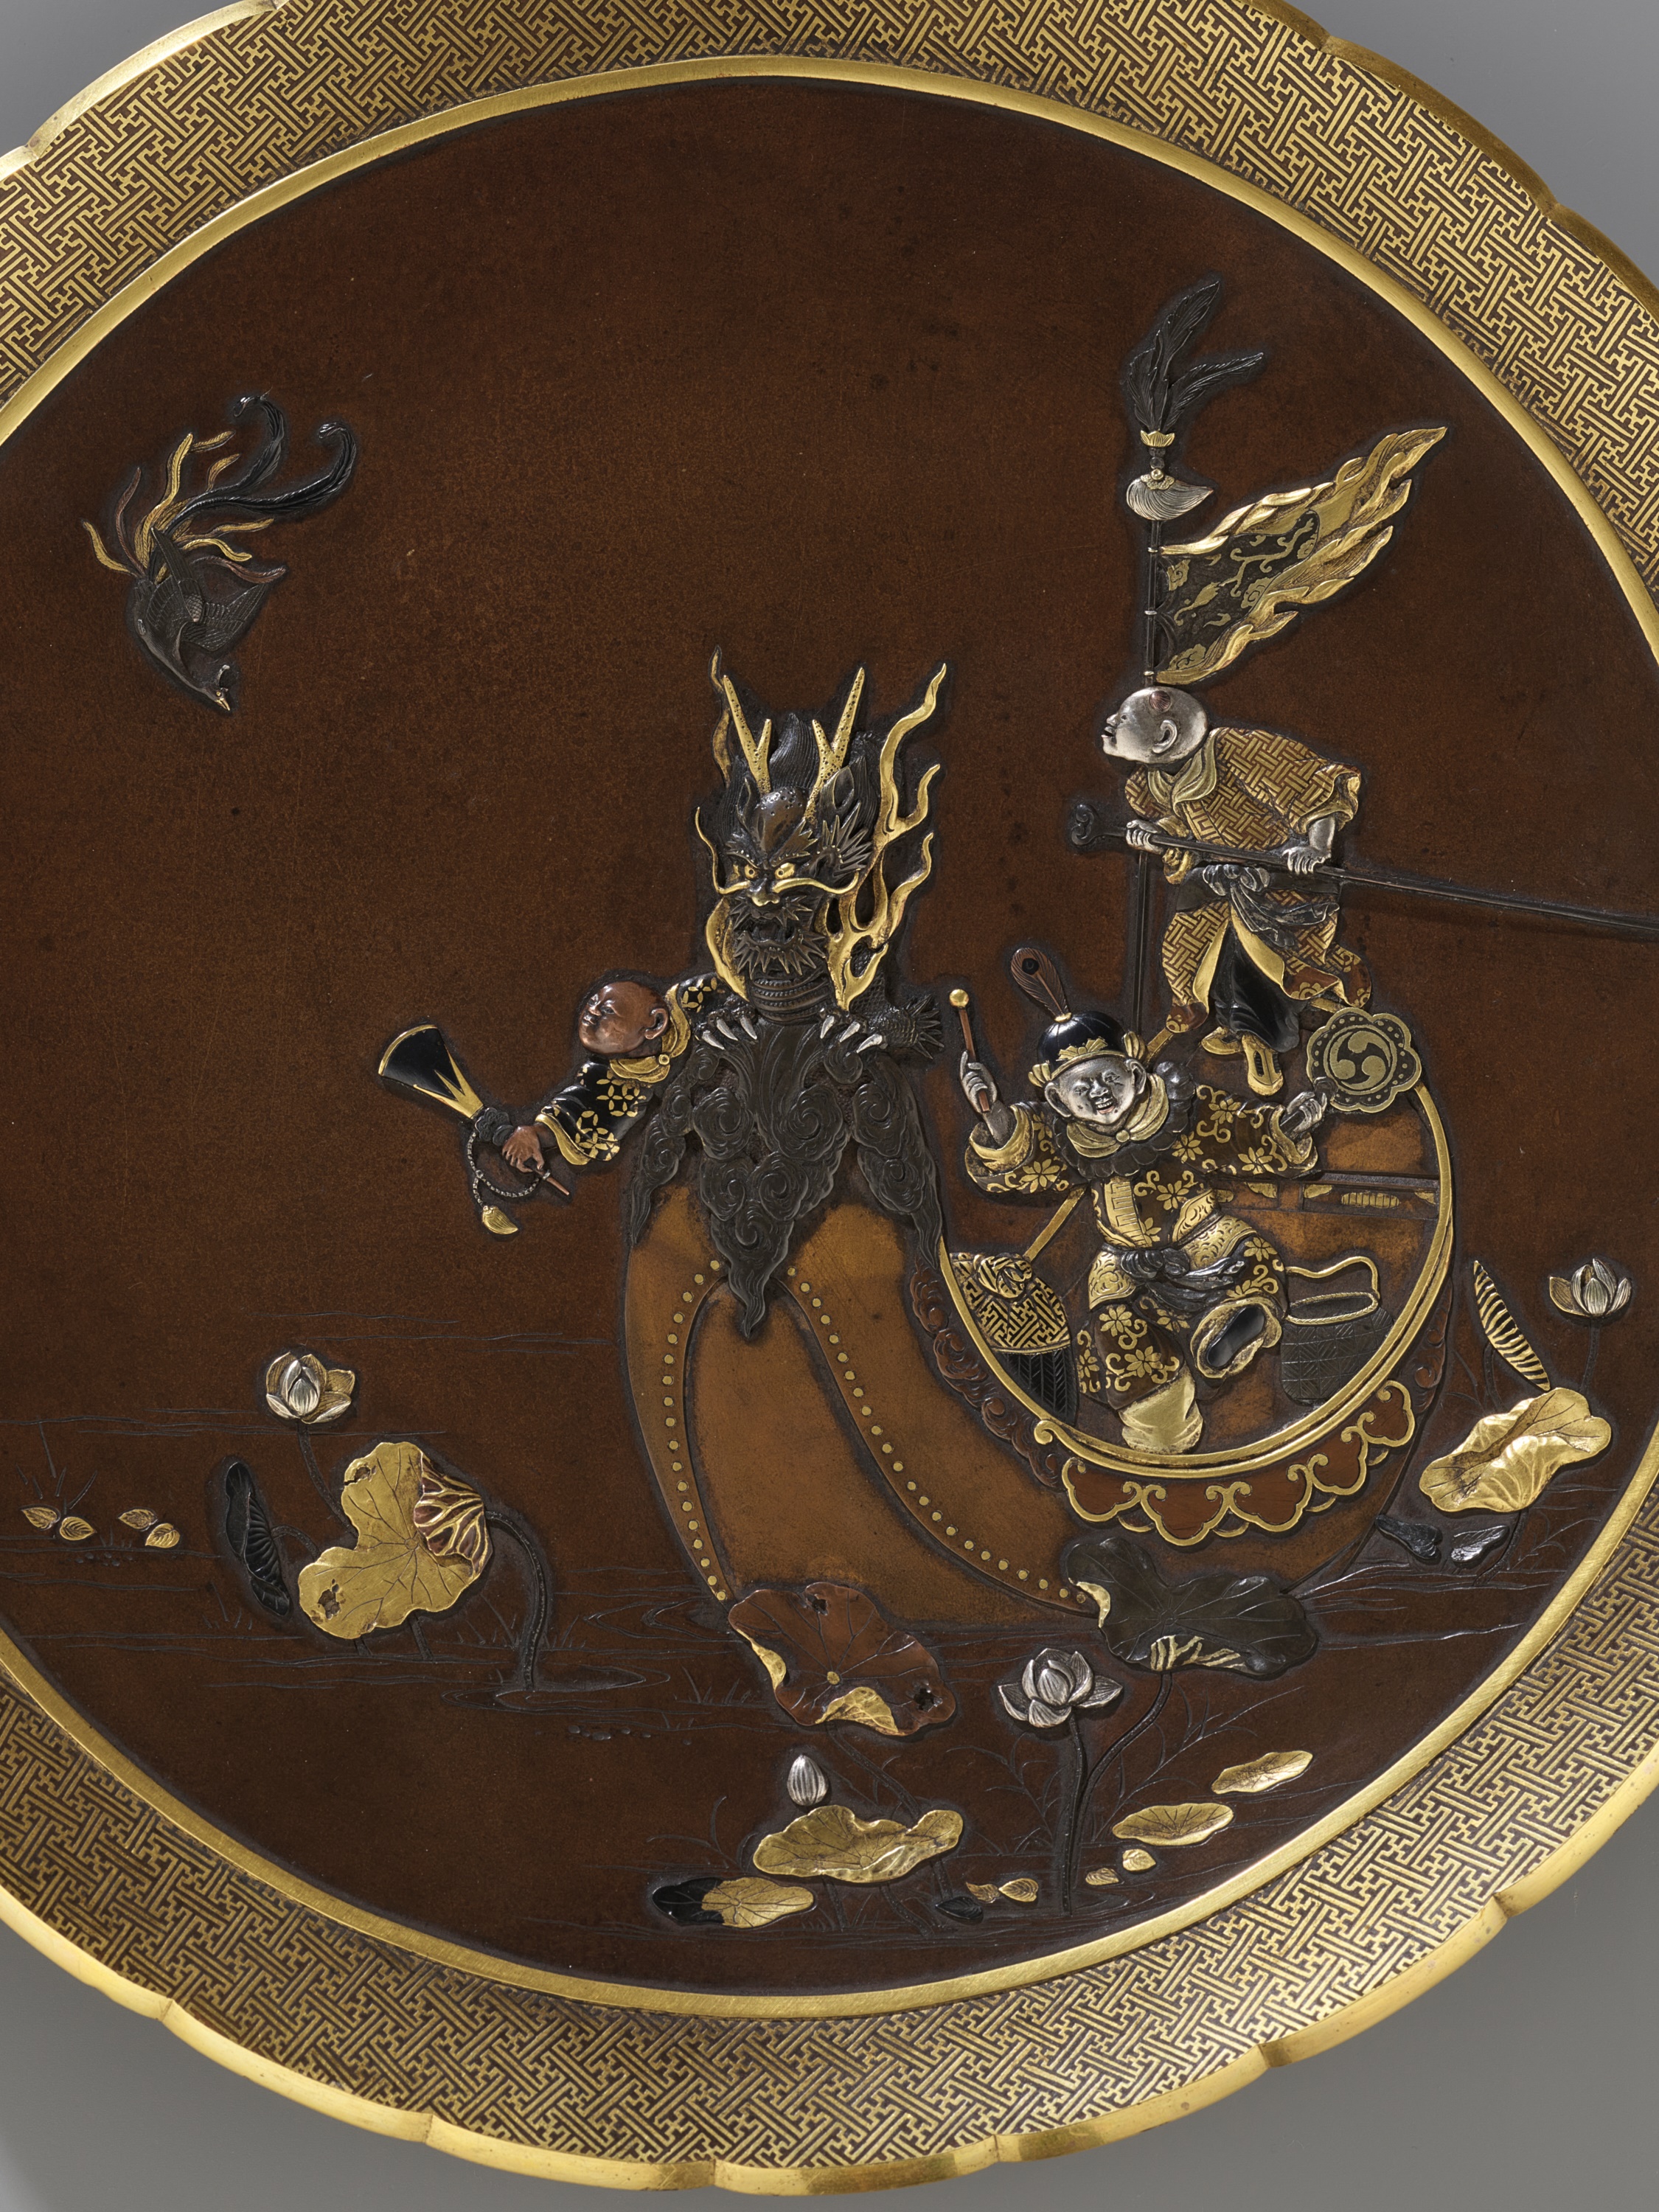 INOUE: A SUPERB INLAID BRONZE DISH DEPICTING BOYS ON A DRAGON BOAT - Image 6 of 6